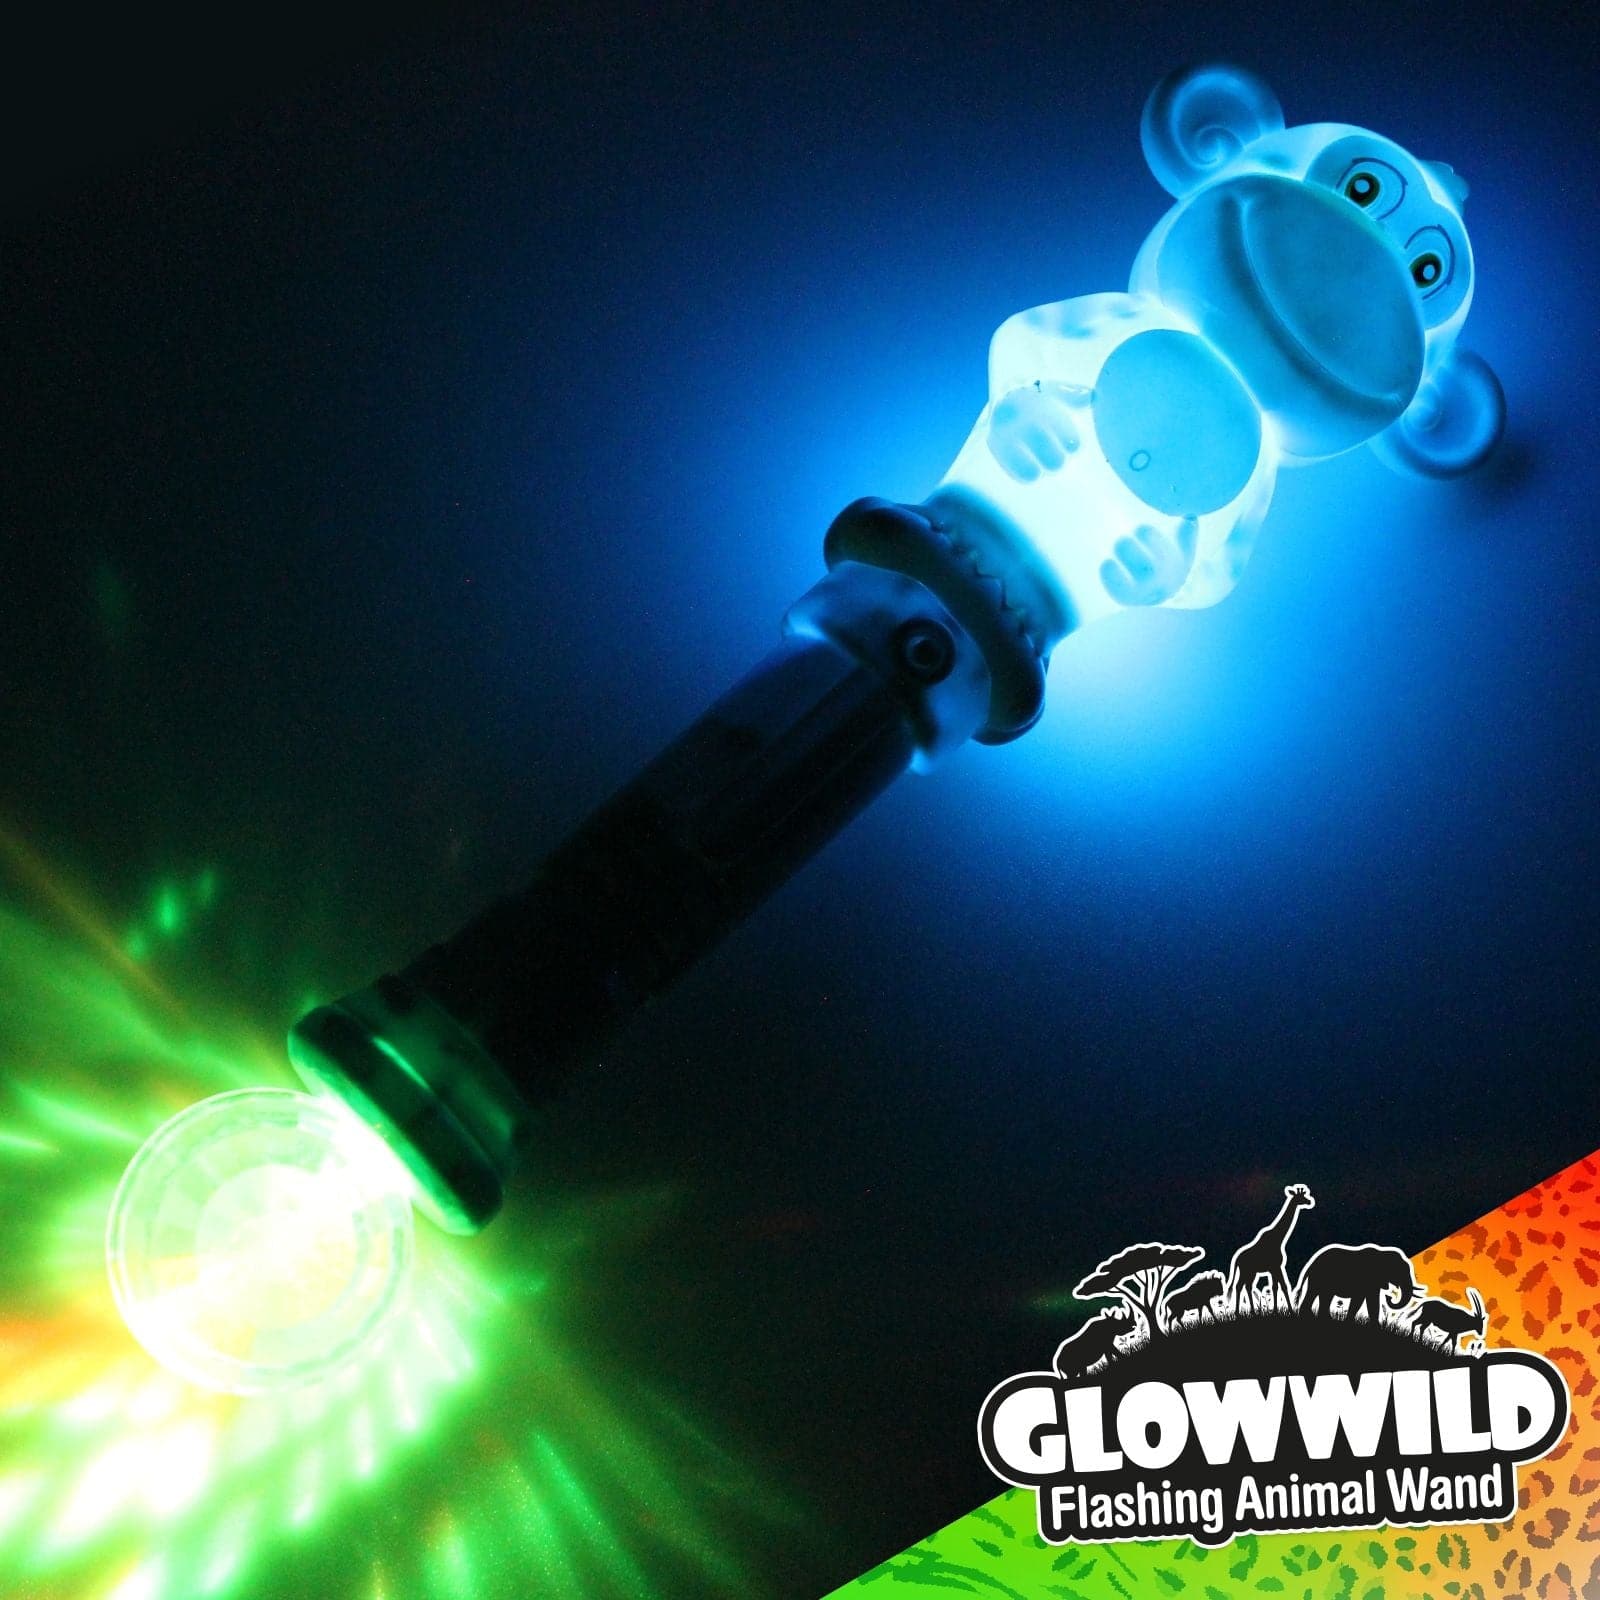 Monkey Mega Flashing Animal Wand, This cheeky monkey is guaranteed to put a smile on your face with it's super bright colour flash effects! A large baton finished with a friendly monkey on the top and a disco ball to the base, this funky wand is packed with multi coloured, multi function LEDs that shine through a loop of colourful effects! Glow Wild monkey flashing animal wand Multi coloured, multi function LEDs Monkey top Disco ball at base projects multi coloured light effects Sturdy pink or blue plastic 